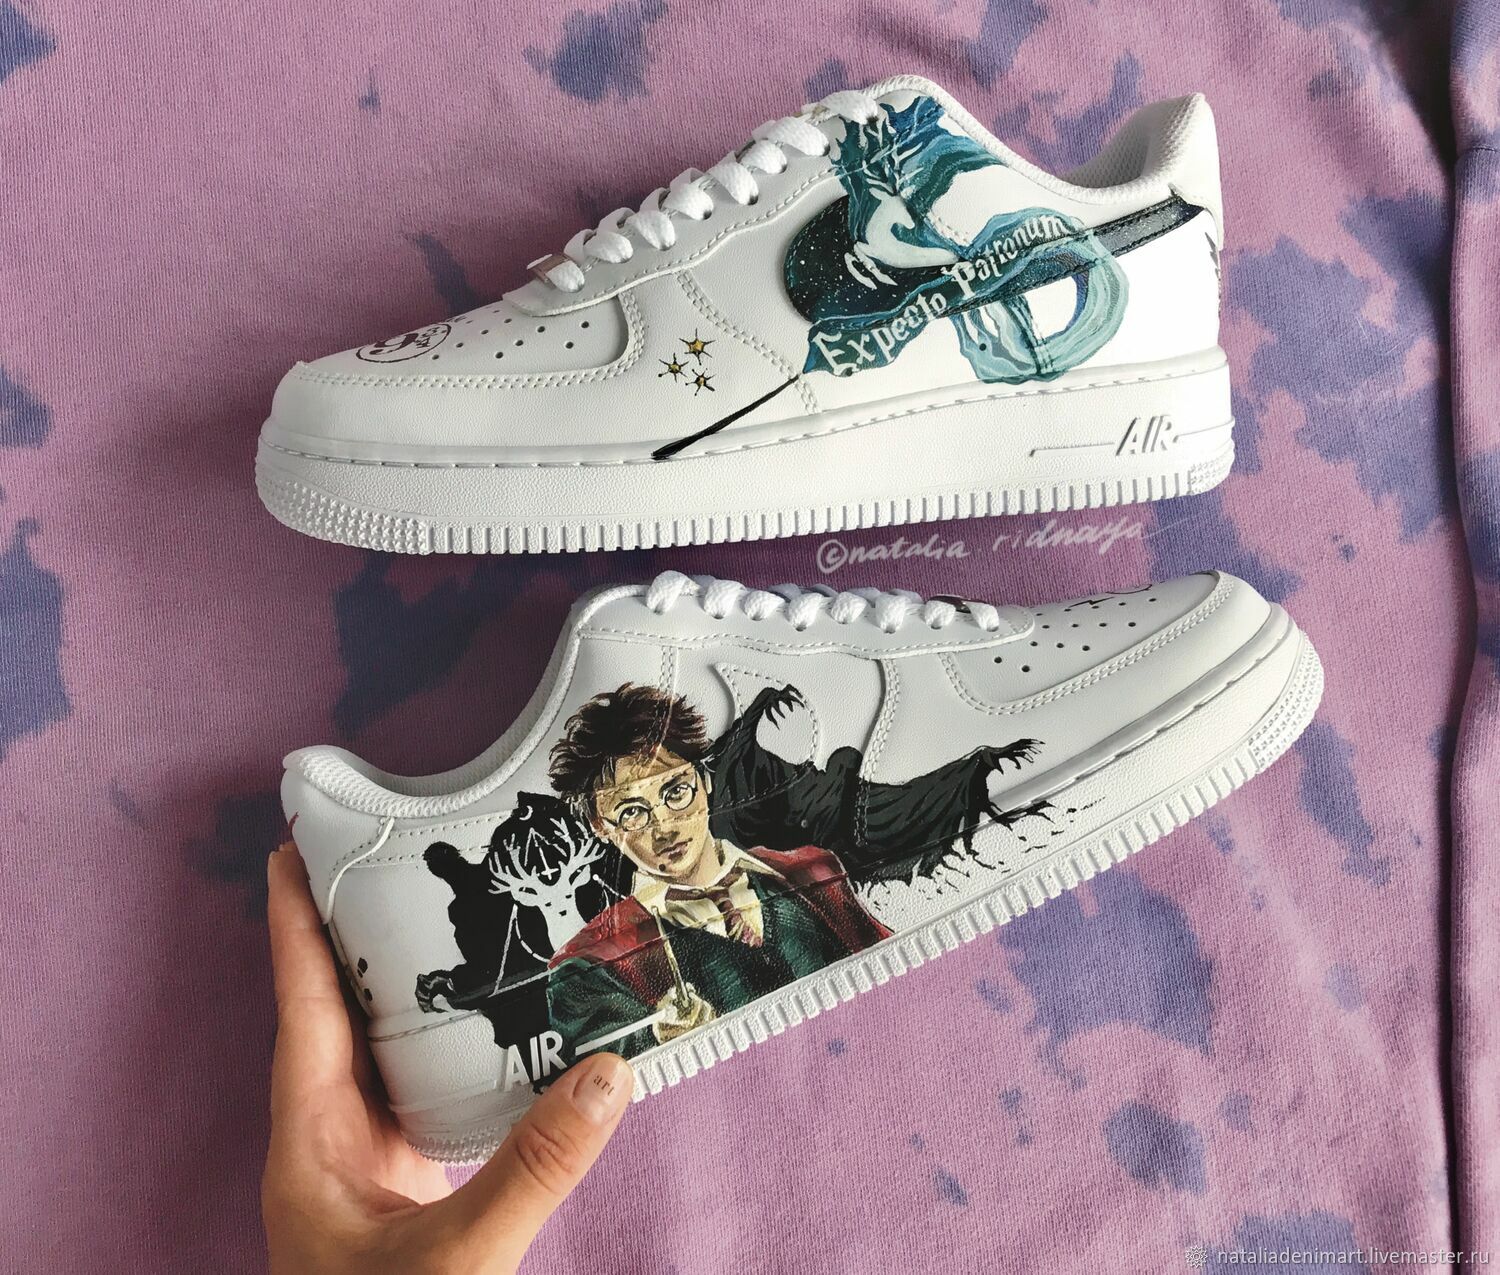 Custom Painted Sneakers Harry Potter Gifts Sneakers with Print – купить на Ярмарке Мастеров R8790COM | Sneakers, Omsk